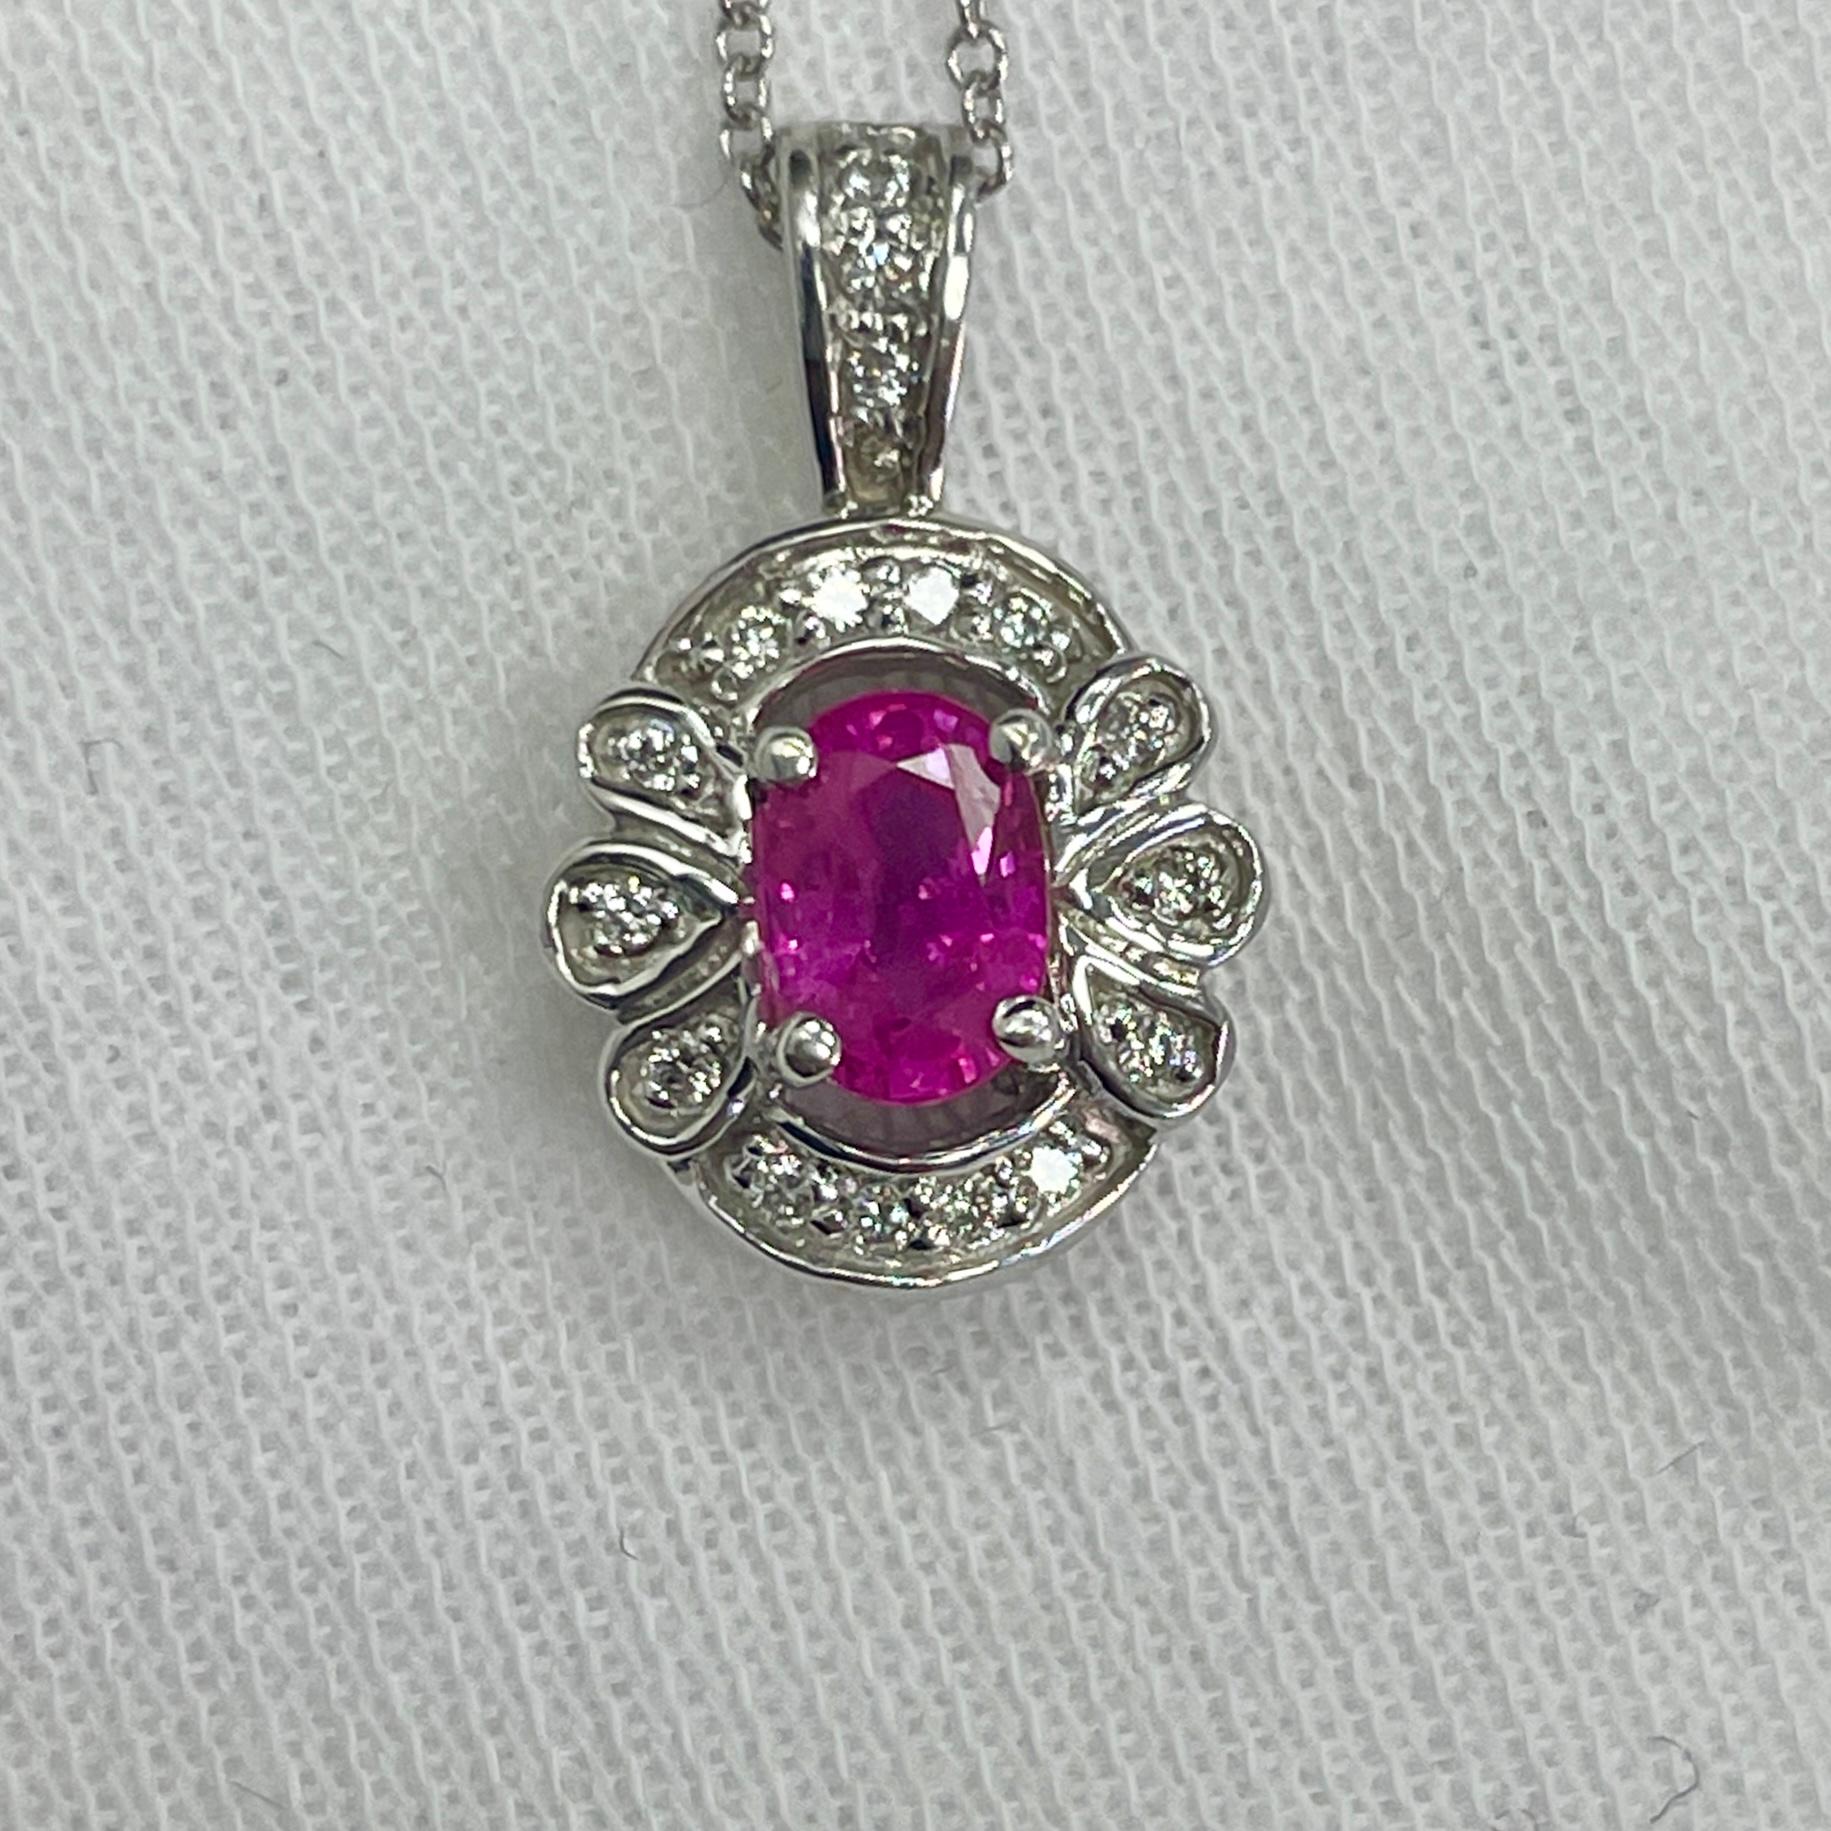 A rich colored, 0.80Ct hot pink sapphire in a diamond (0.09Ct) pendant